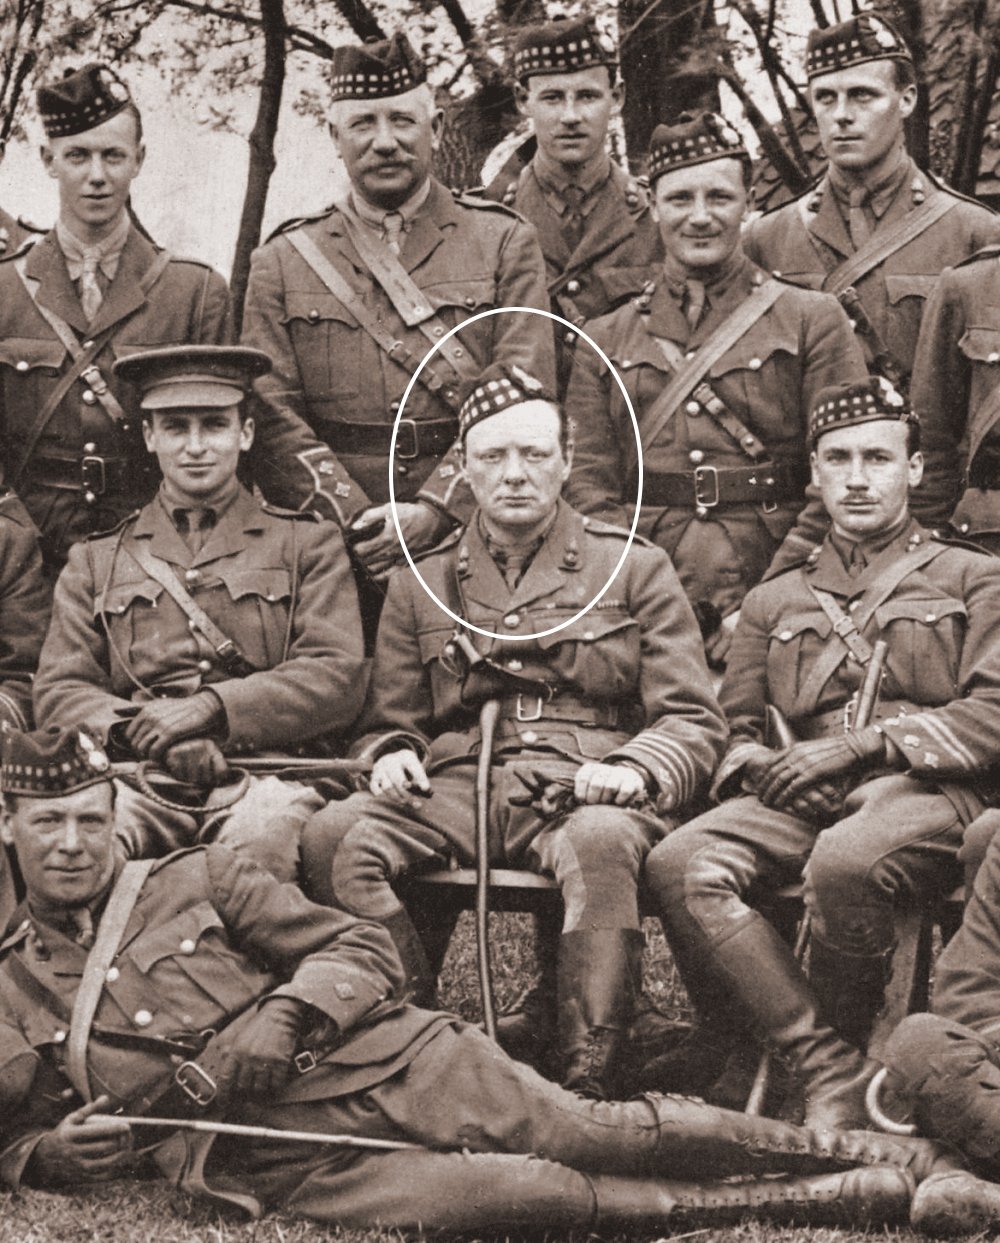 Vintage photograph of a group of soldiers in uniform, with Winston Churchill highlighted in the center by a circle. Churchill is seen wearing a military cap and uniform, commanding the 6th Battalion, the Royal Scots Fusiliers, in 1916.